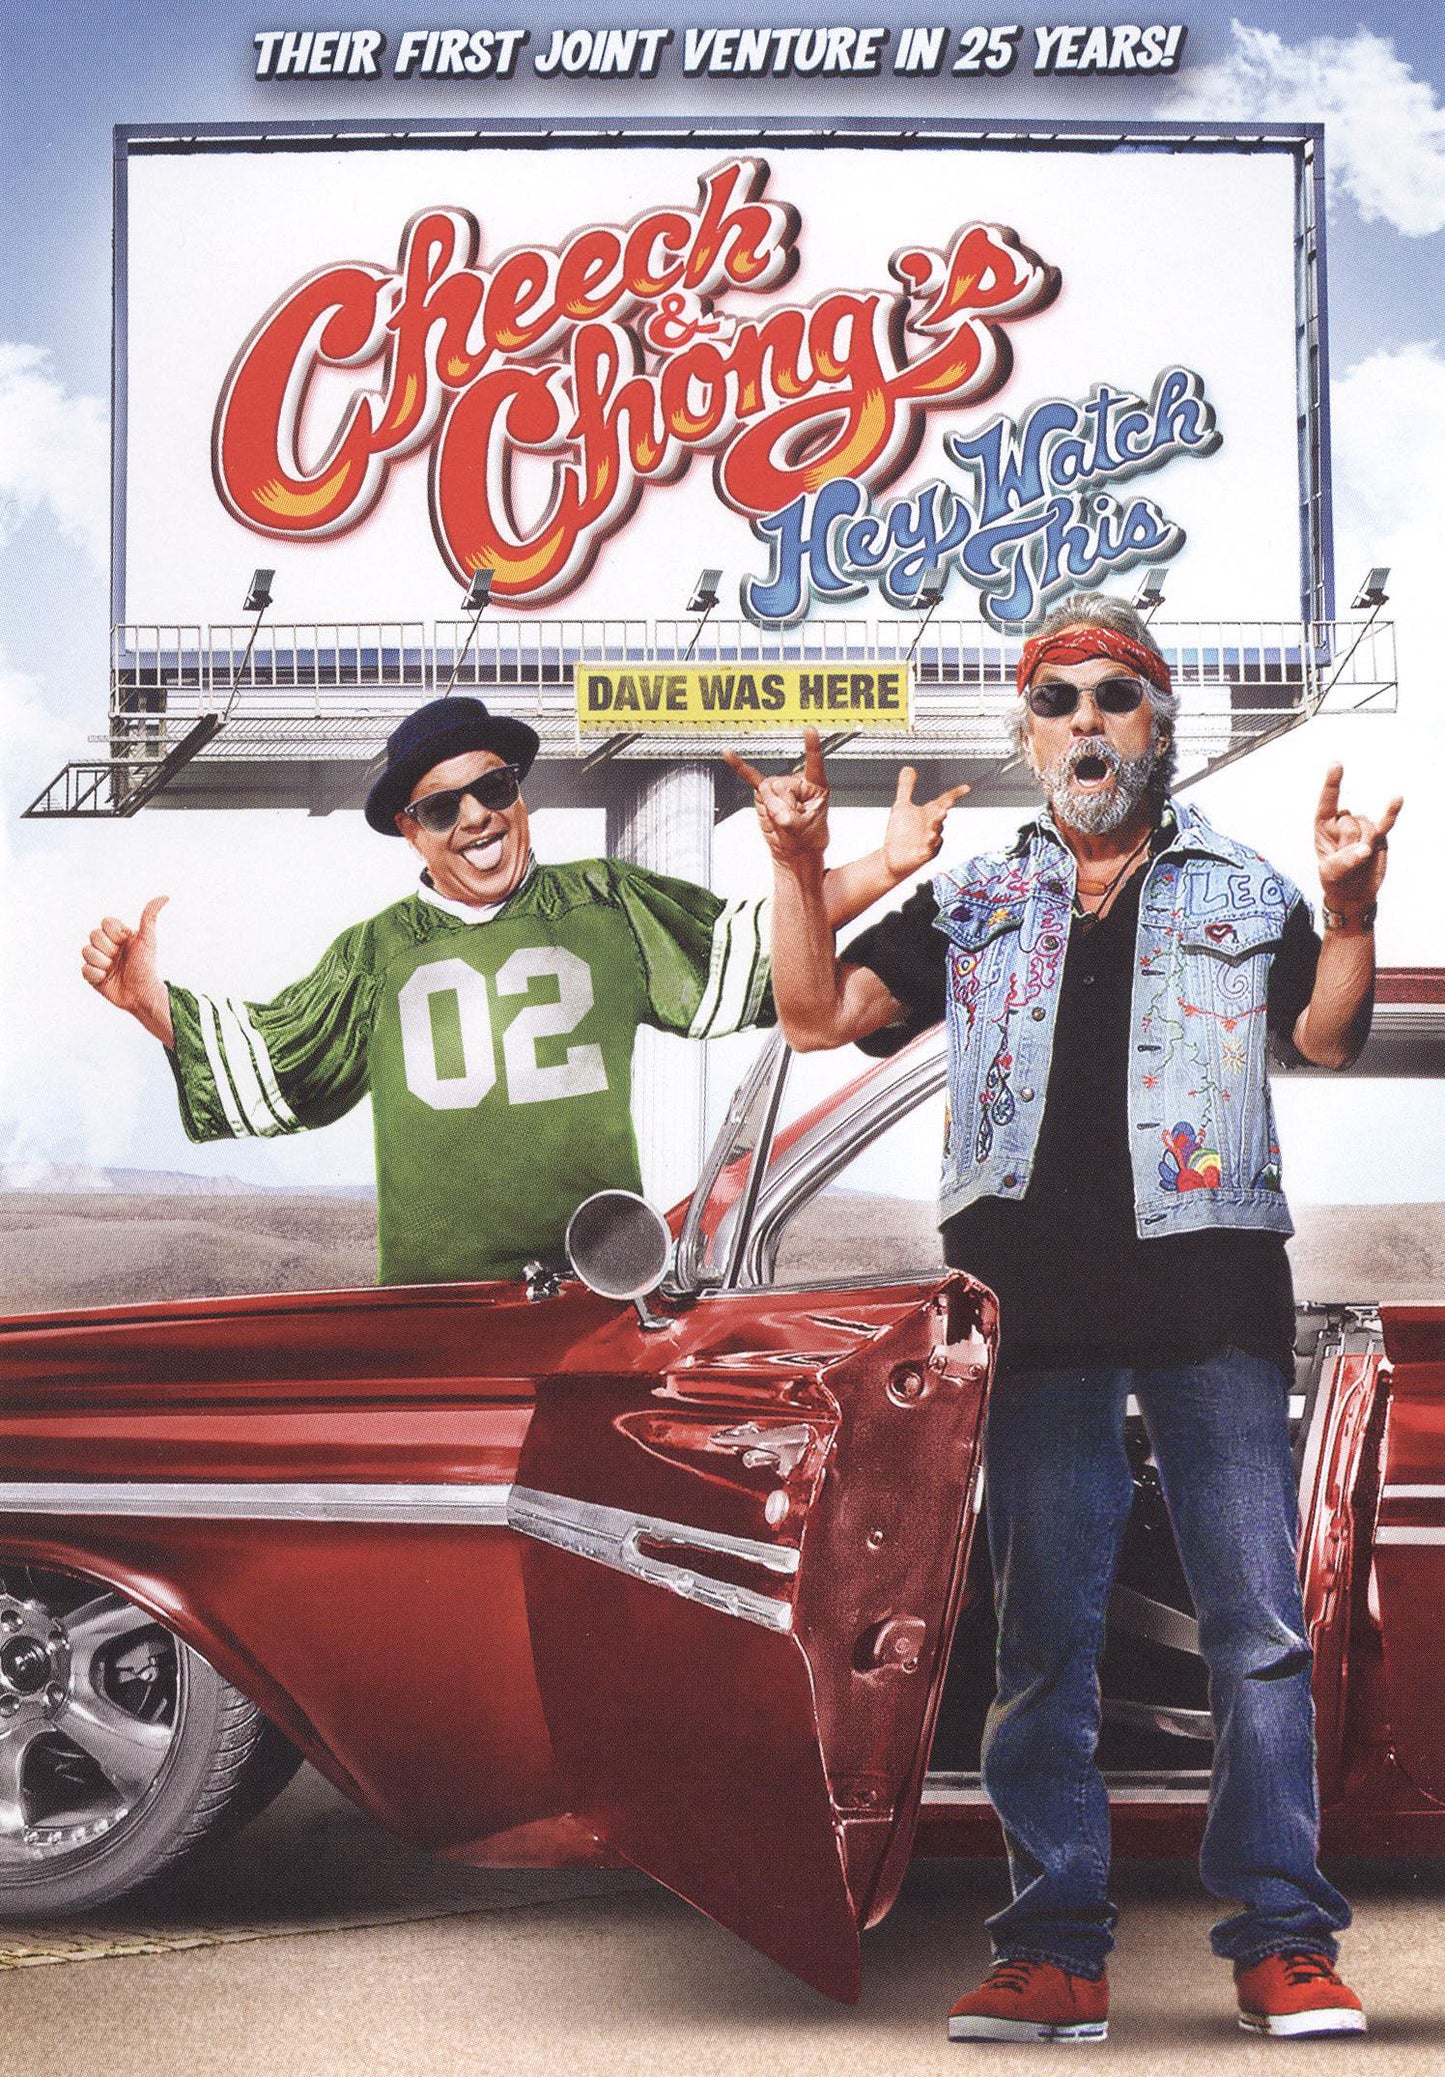 Cheech and Chong's Hey Watch This! cover art